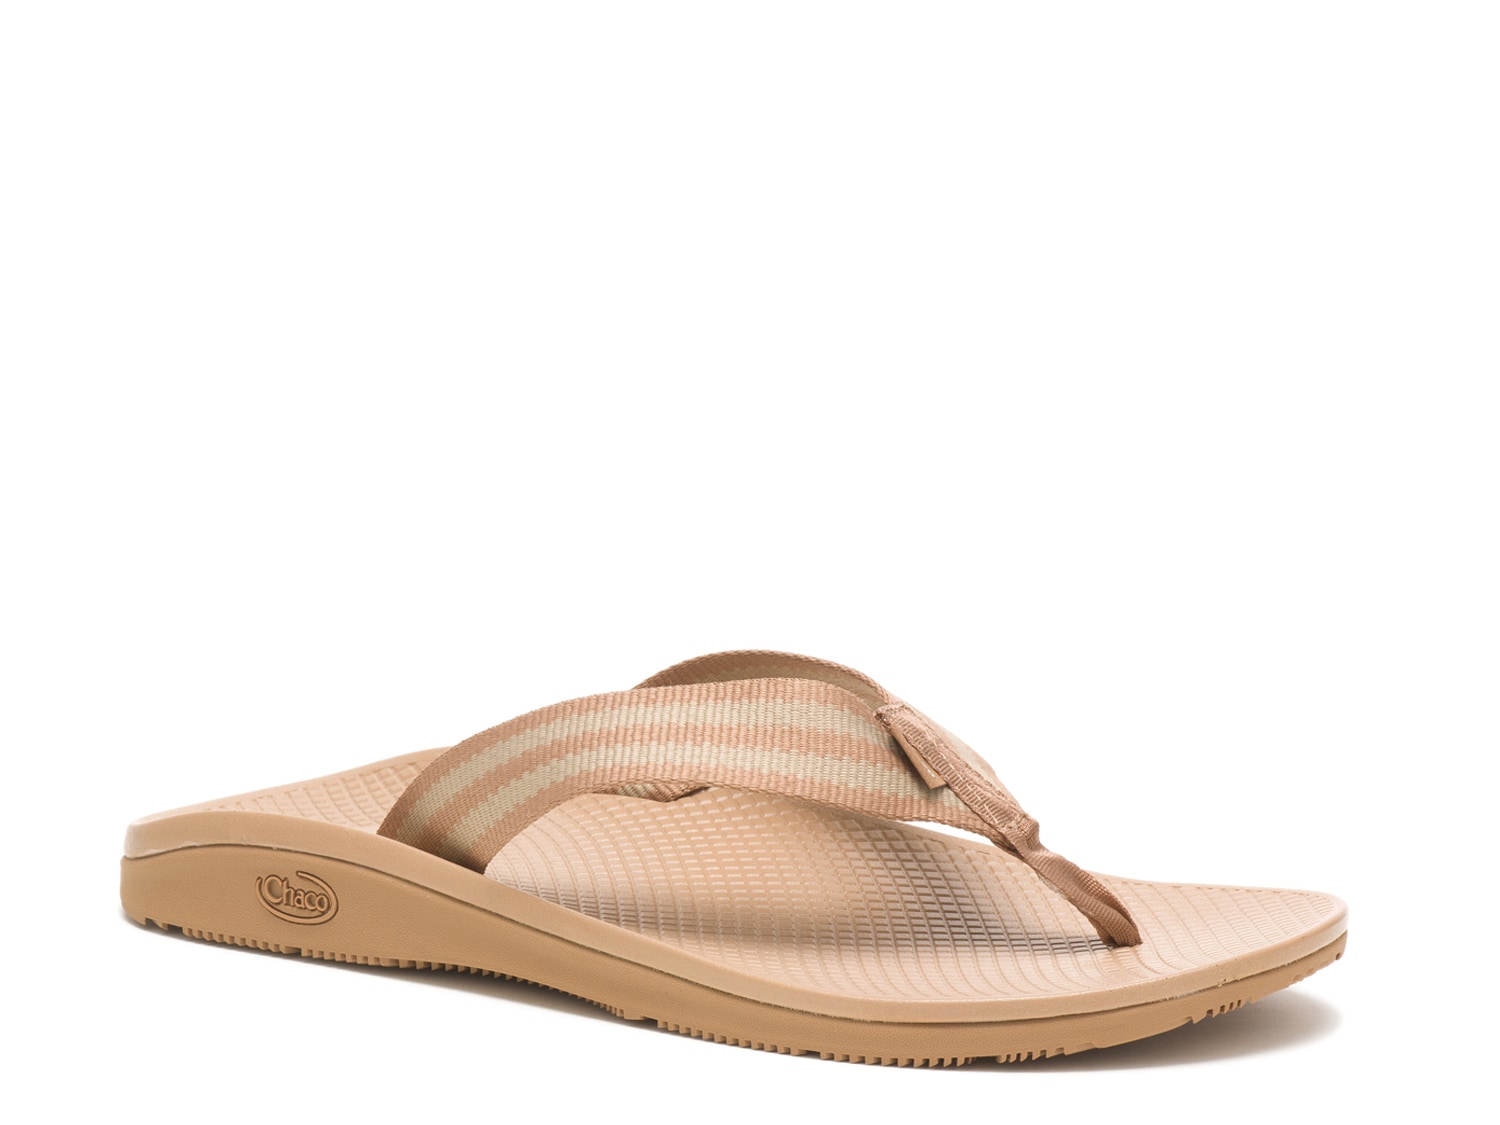 Chaco Classic Flip-Flops (For Men) - Save 27%